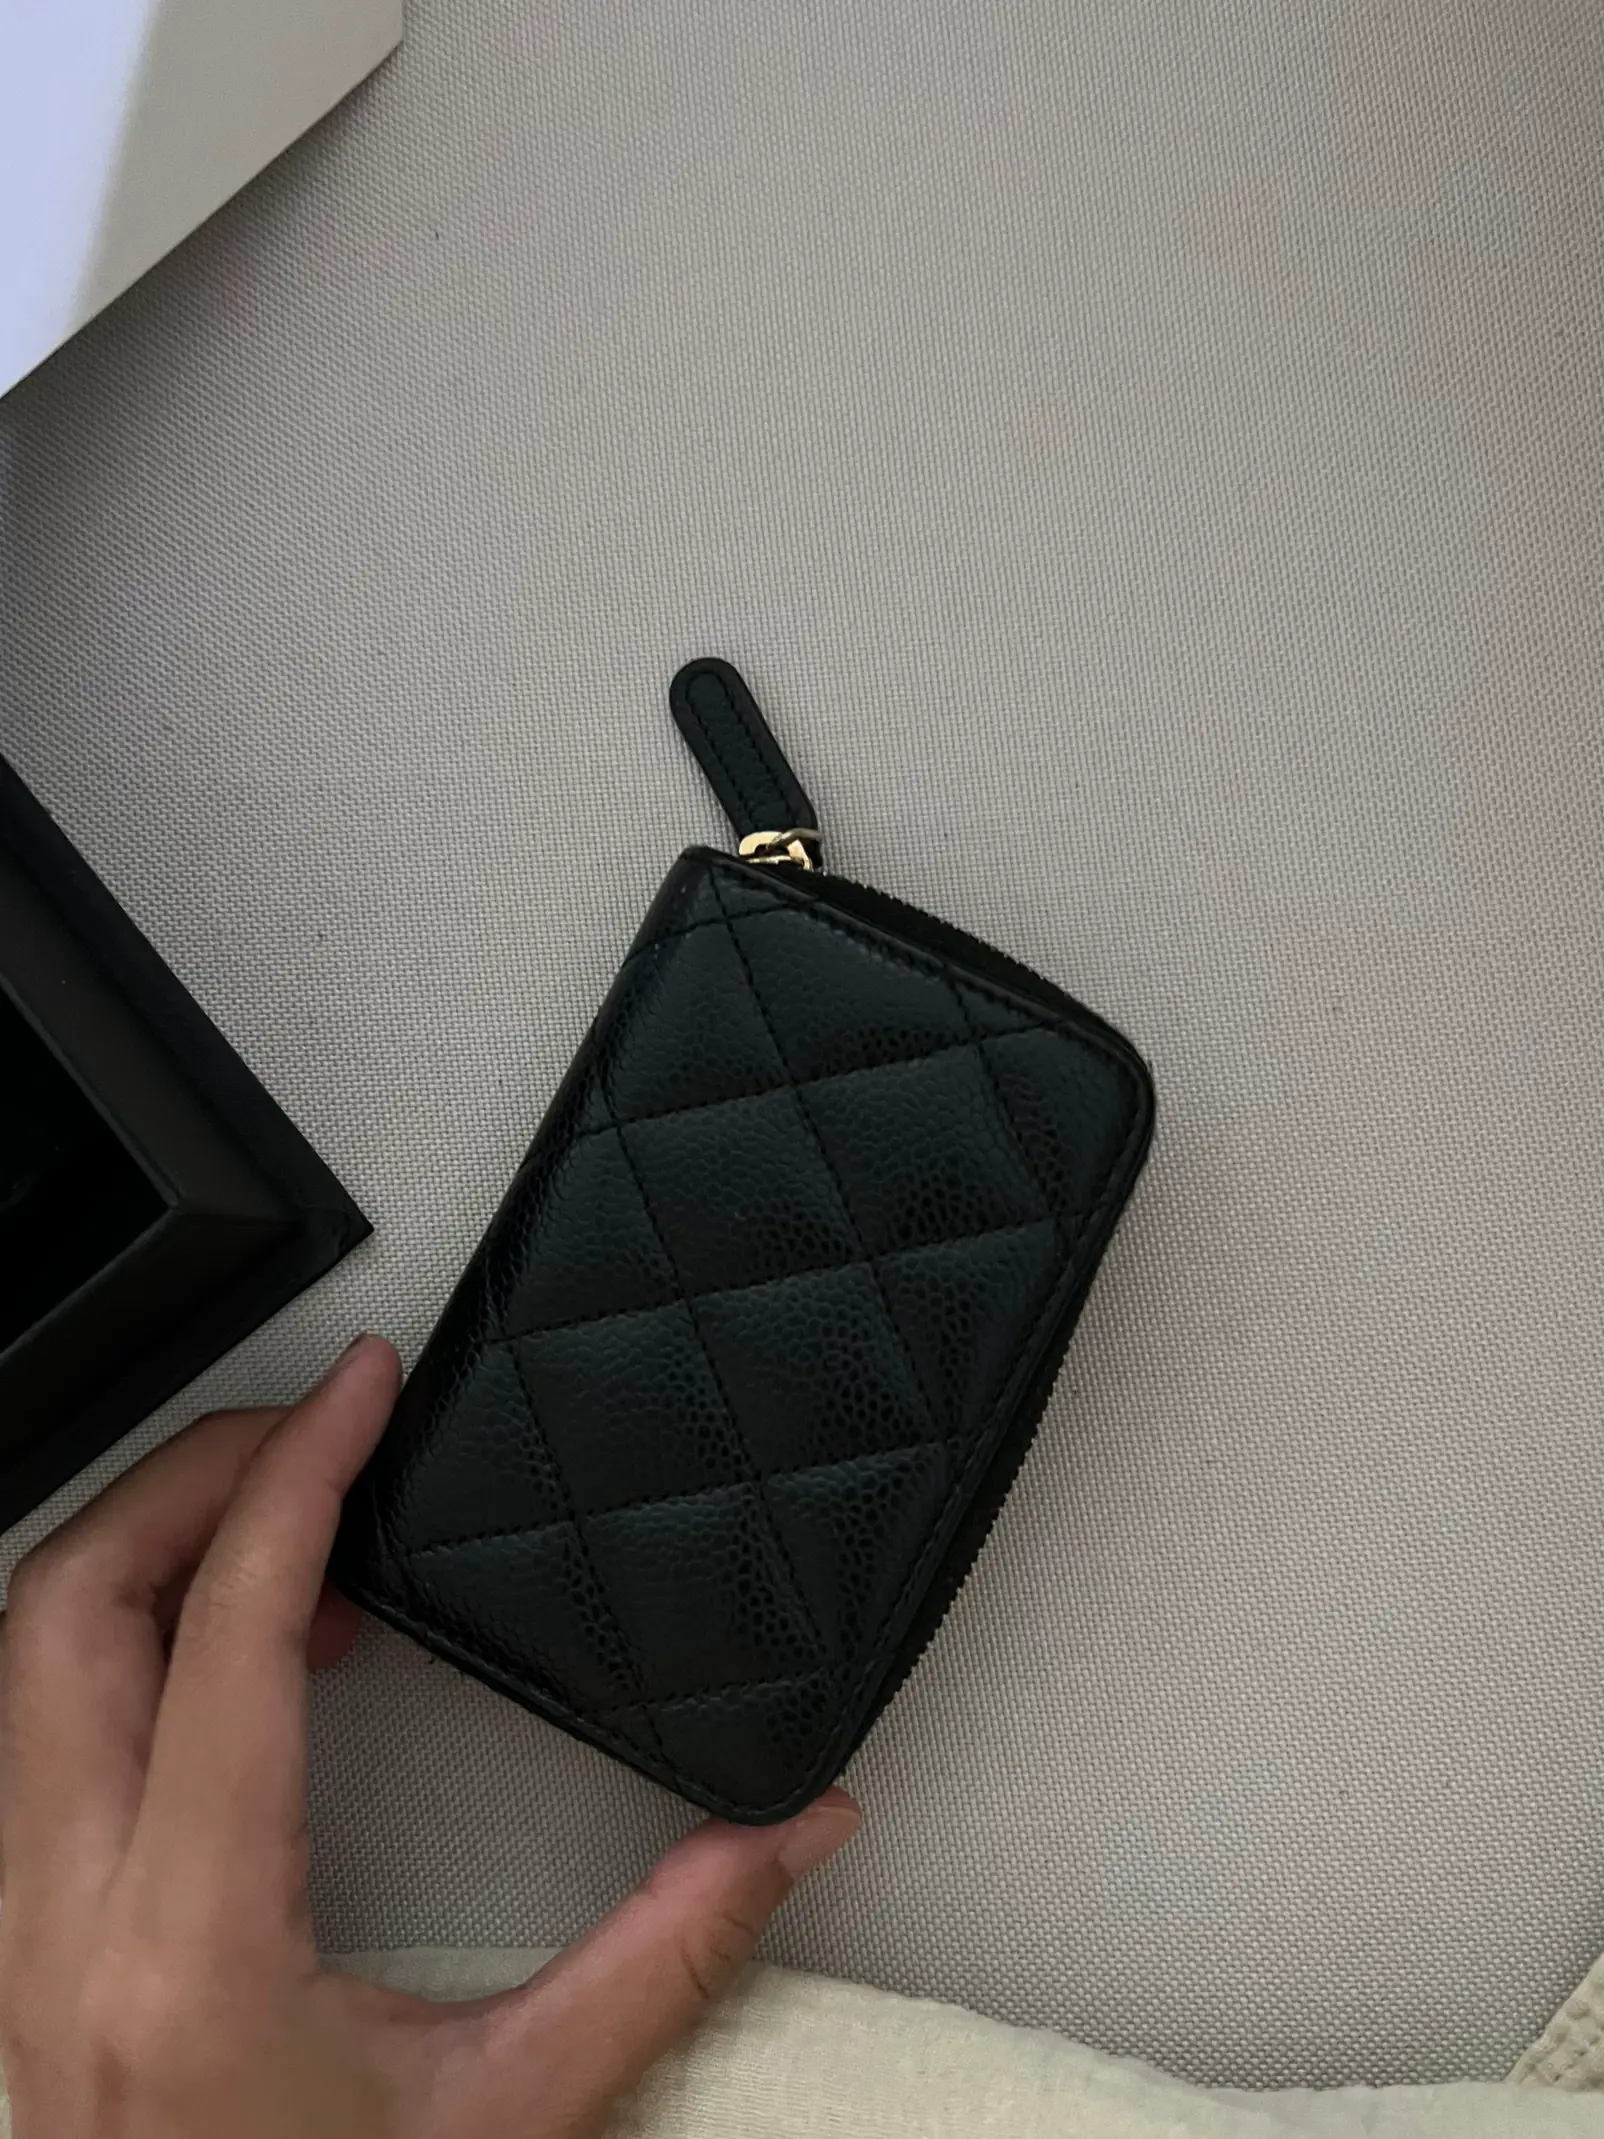 Chanel coin purse reviews, Gallery posted by Adris Insyiraah